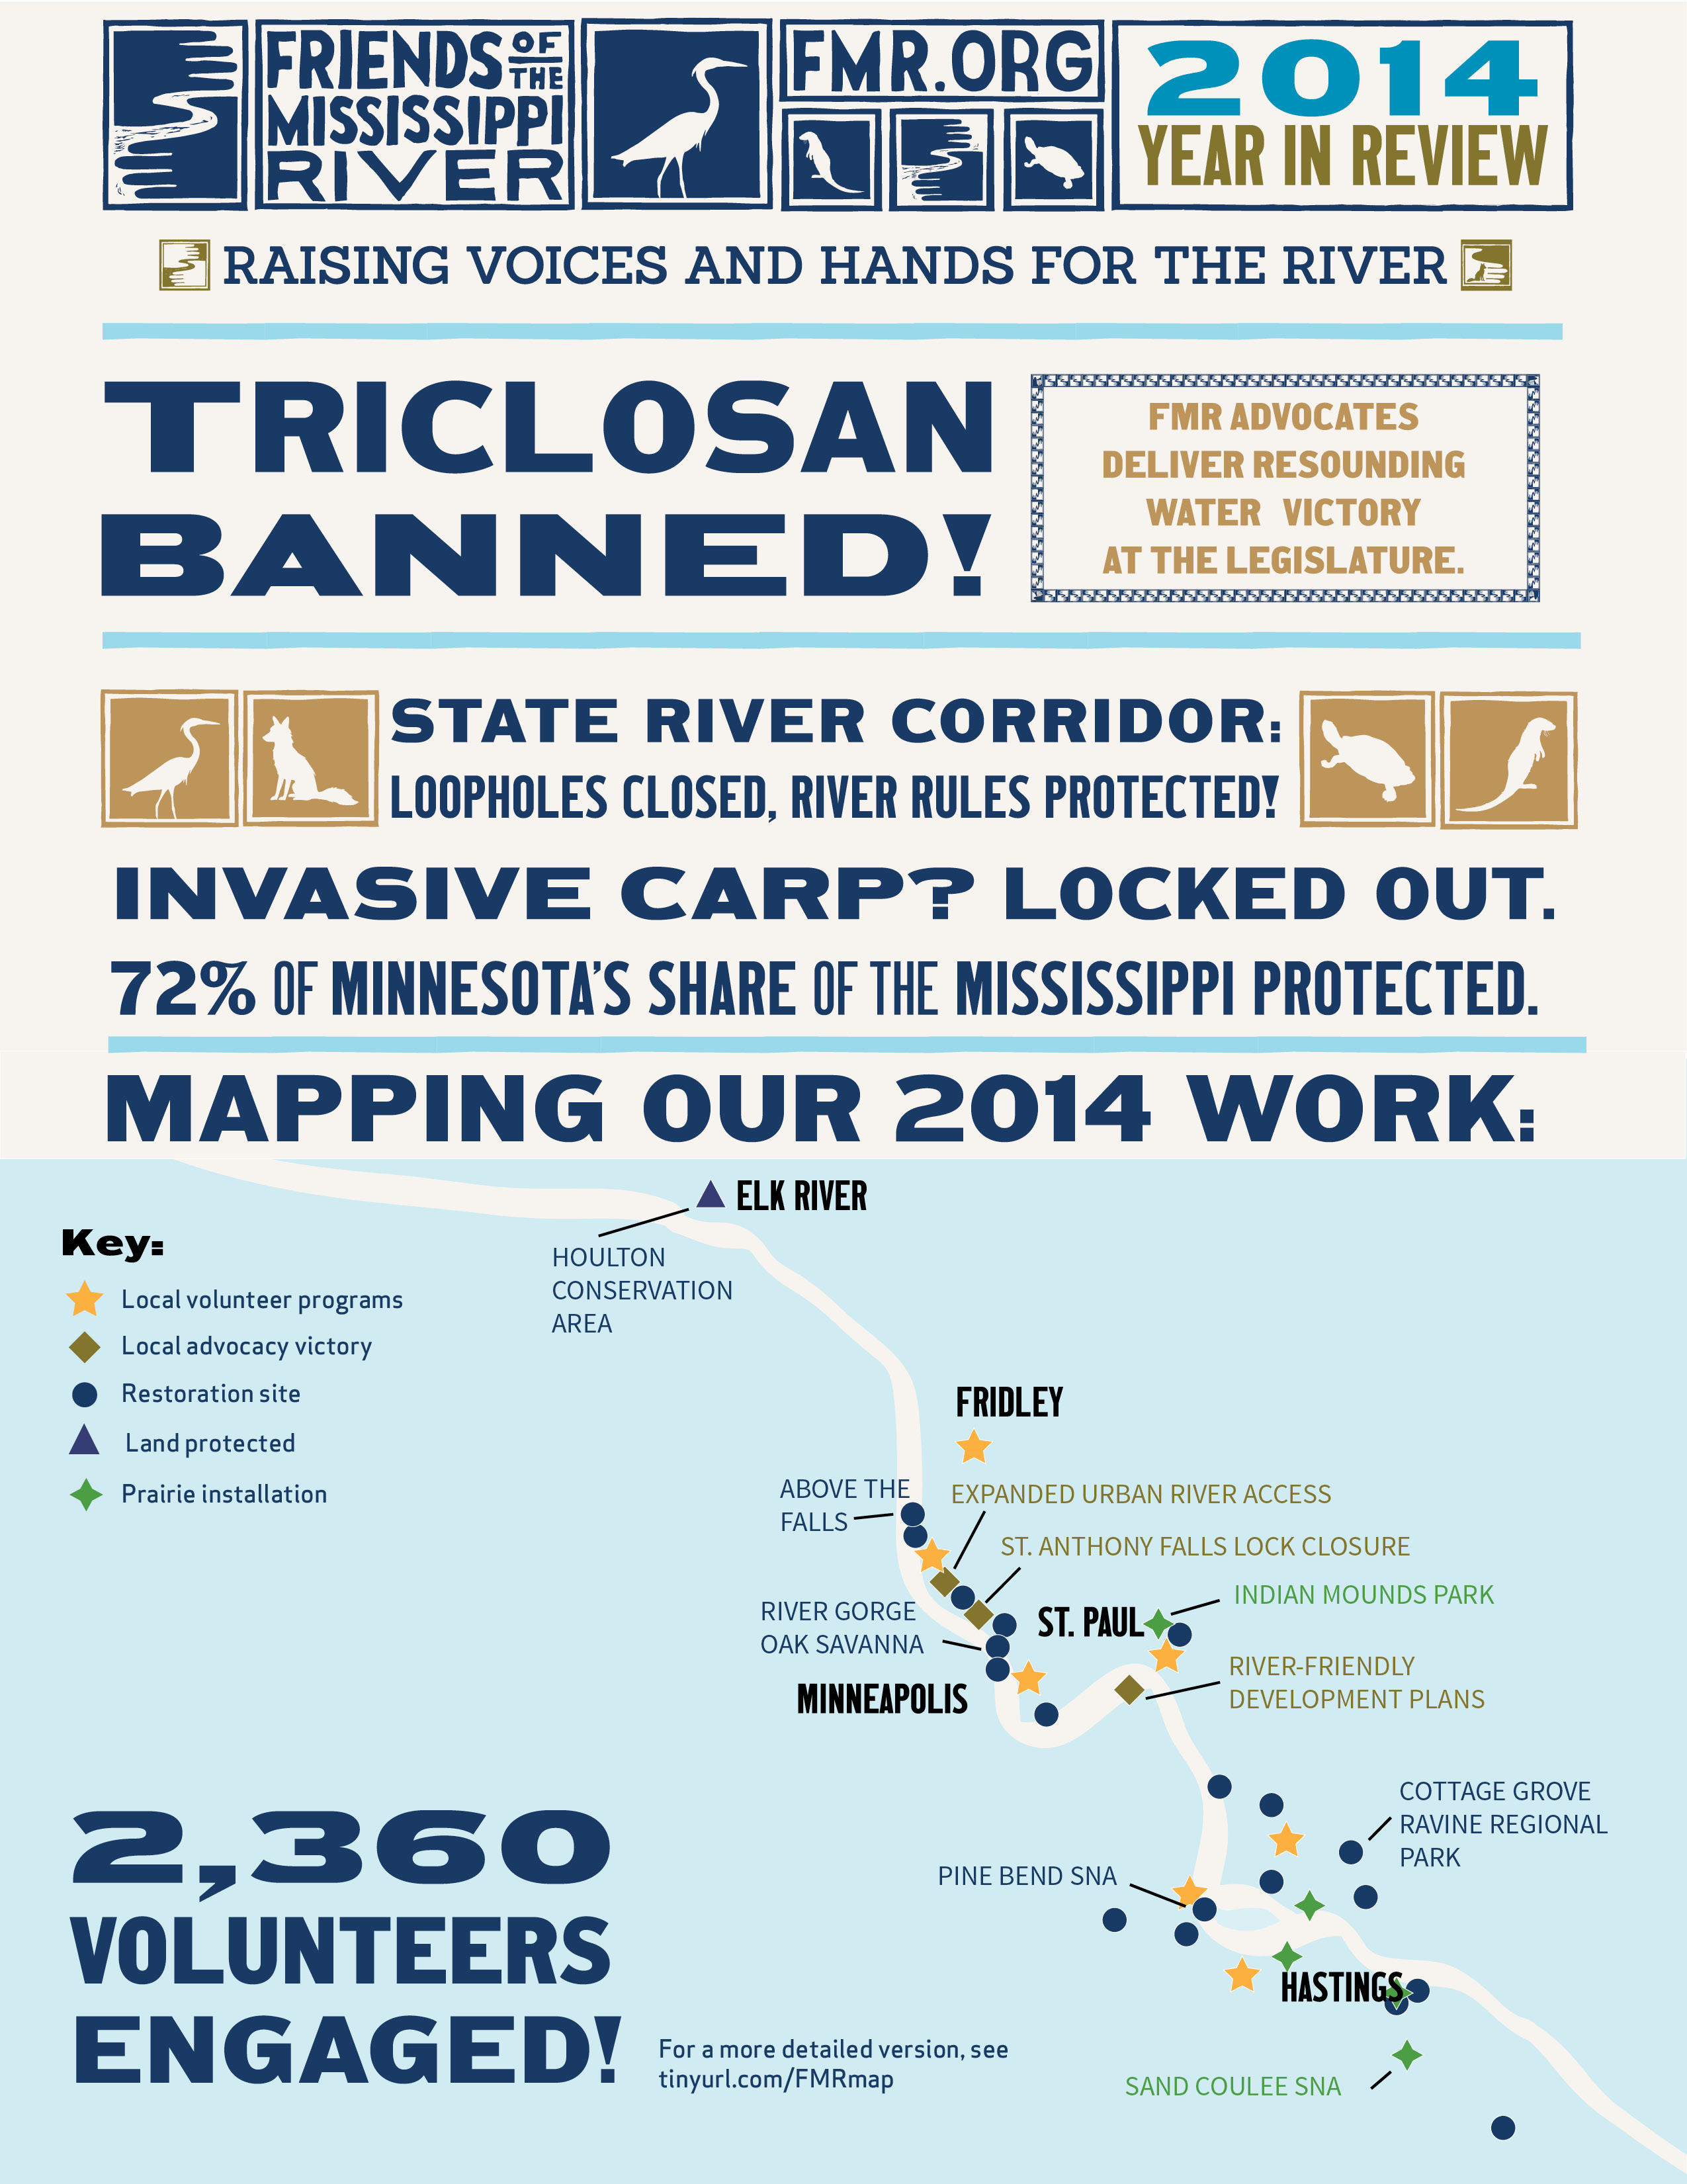 Friends of the Mississippi River 2014 Year in Review Accomplishments